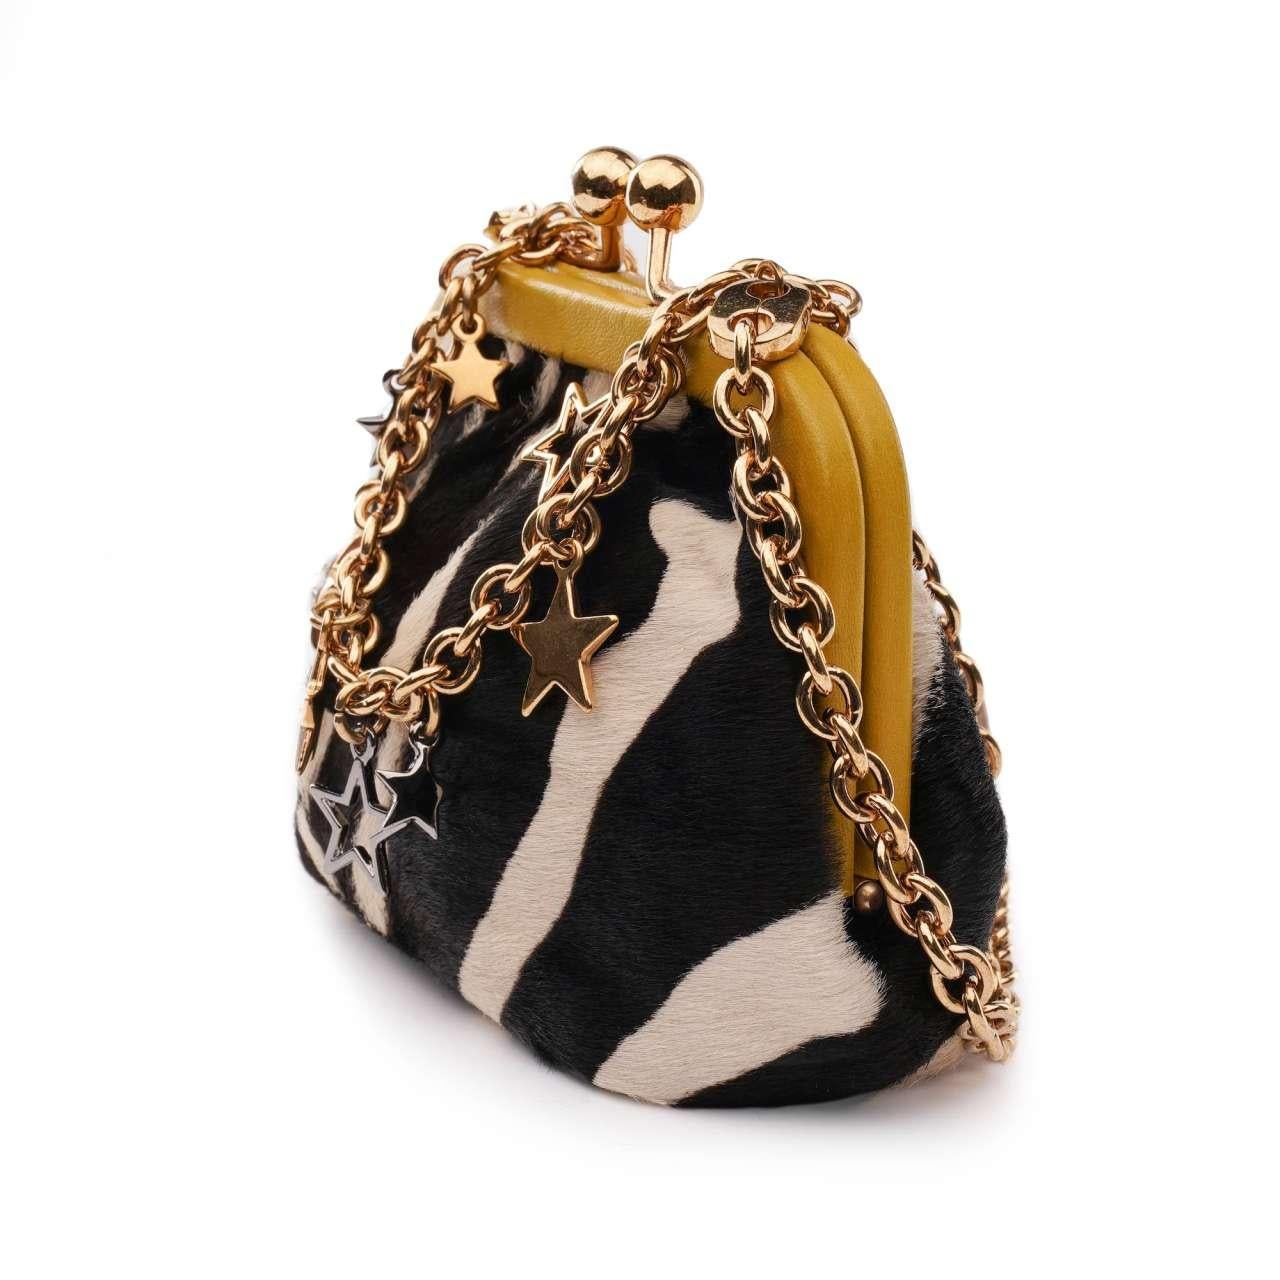 - Lambskin and calfskin fur purse bag with metal stars crystal chain strap in black, white, yellow and gold by DOLCE & GABBANA - New with Tag, Dustbag, Authenticity Card - Material: 80% Calfskin fur,  20% Lambskin - Lining: Fabric - Interior: